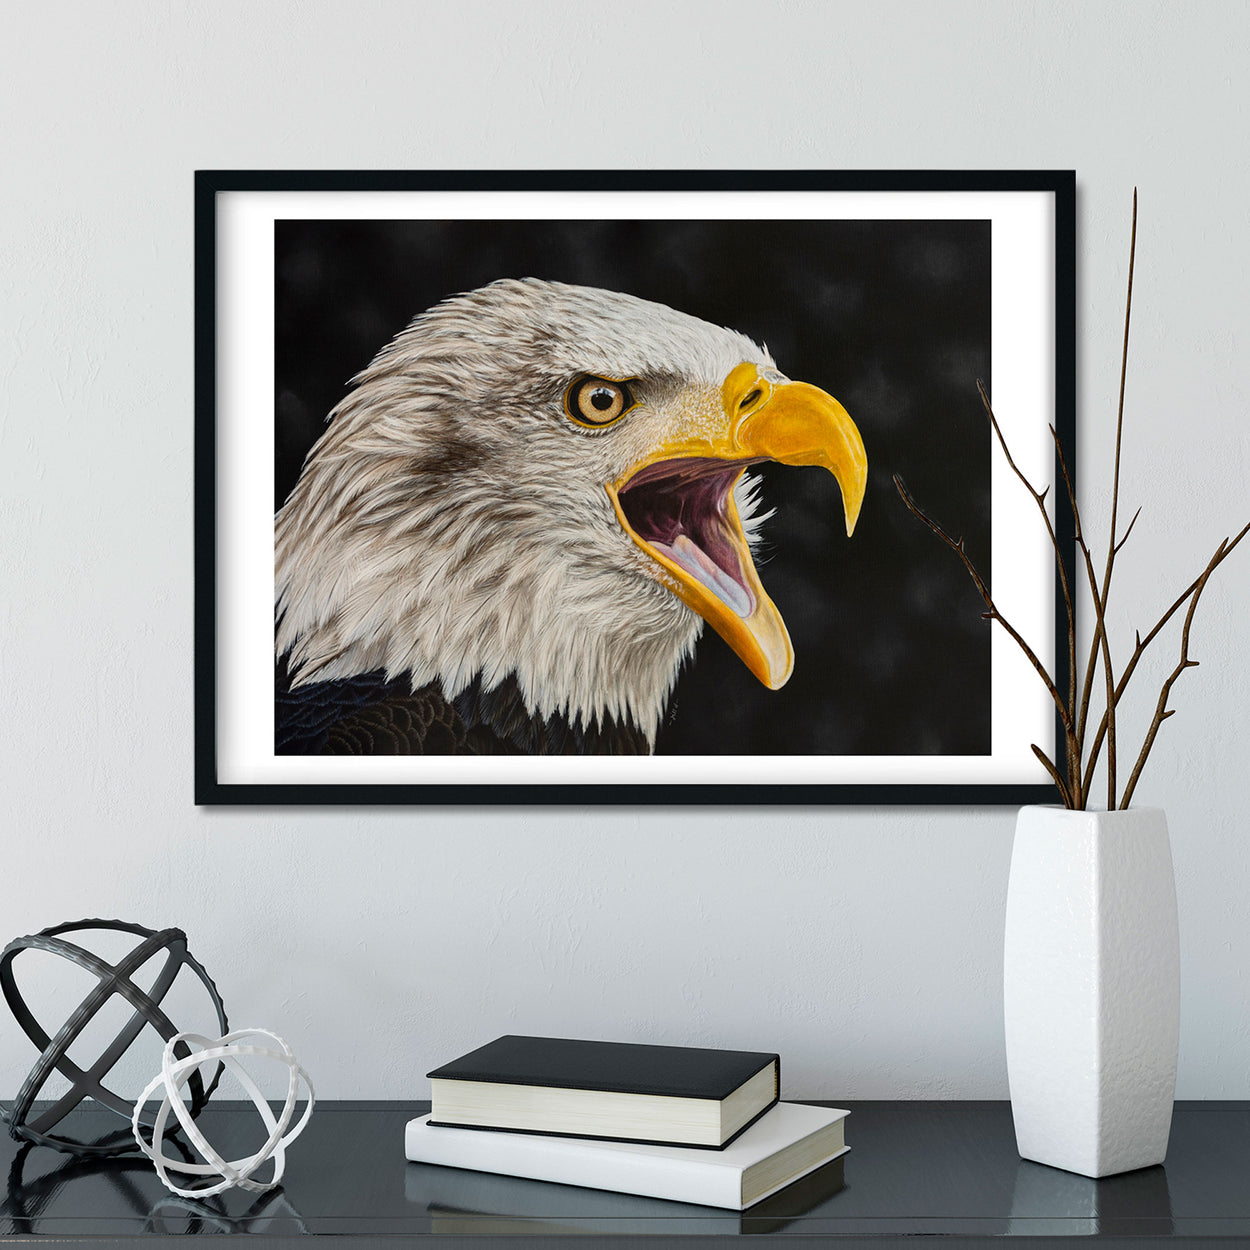 Black frame on white wall containing an art print of a bald eagle portrait with open beak